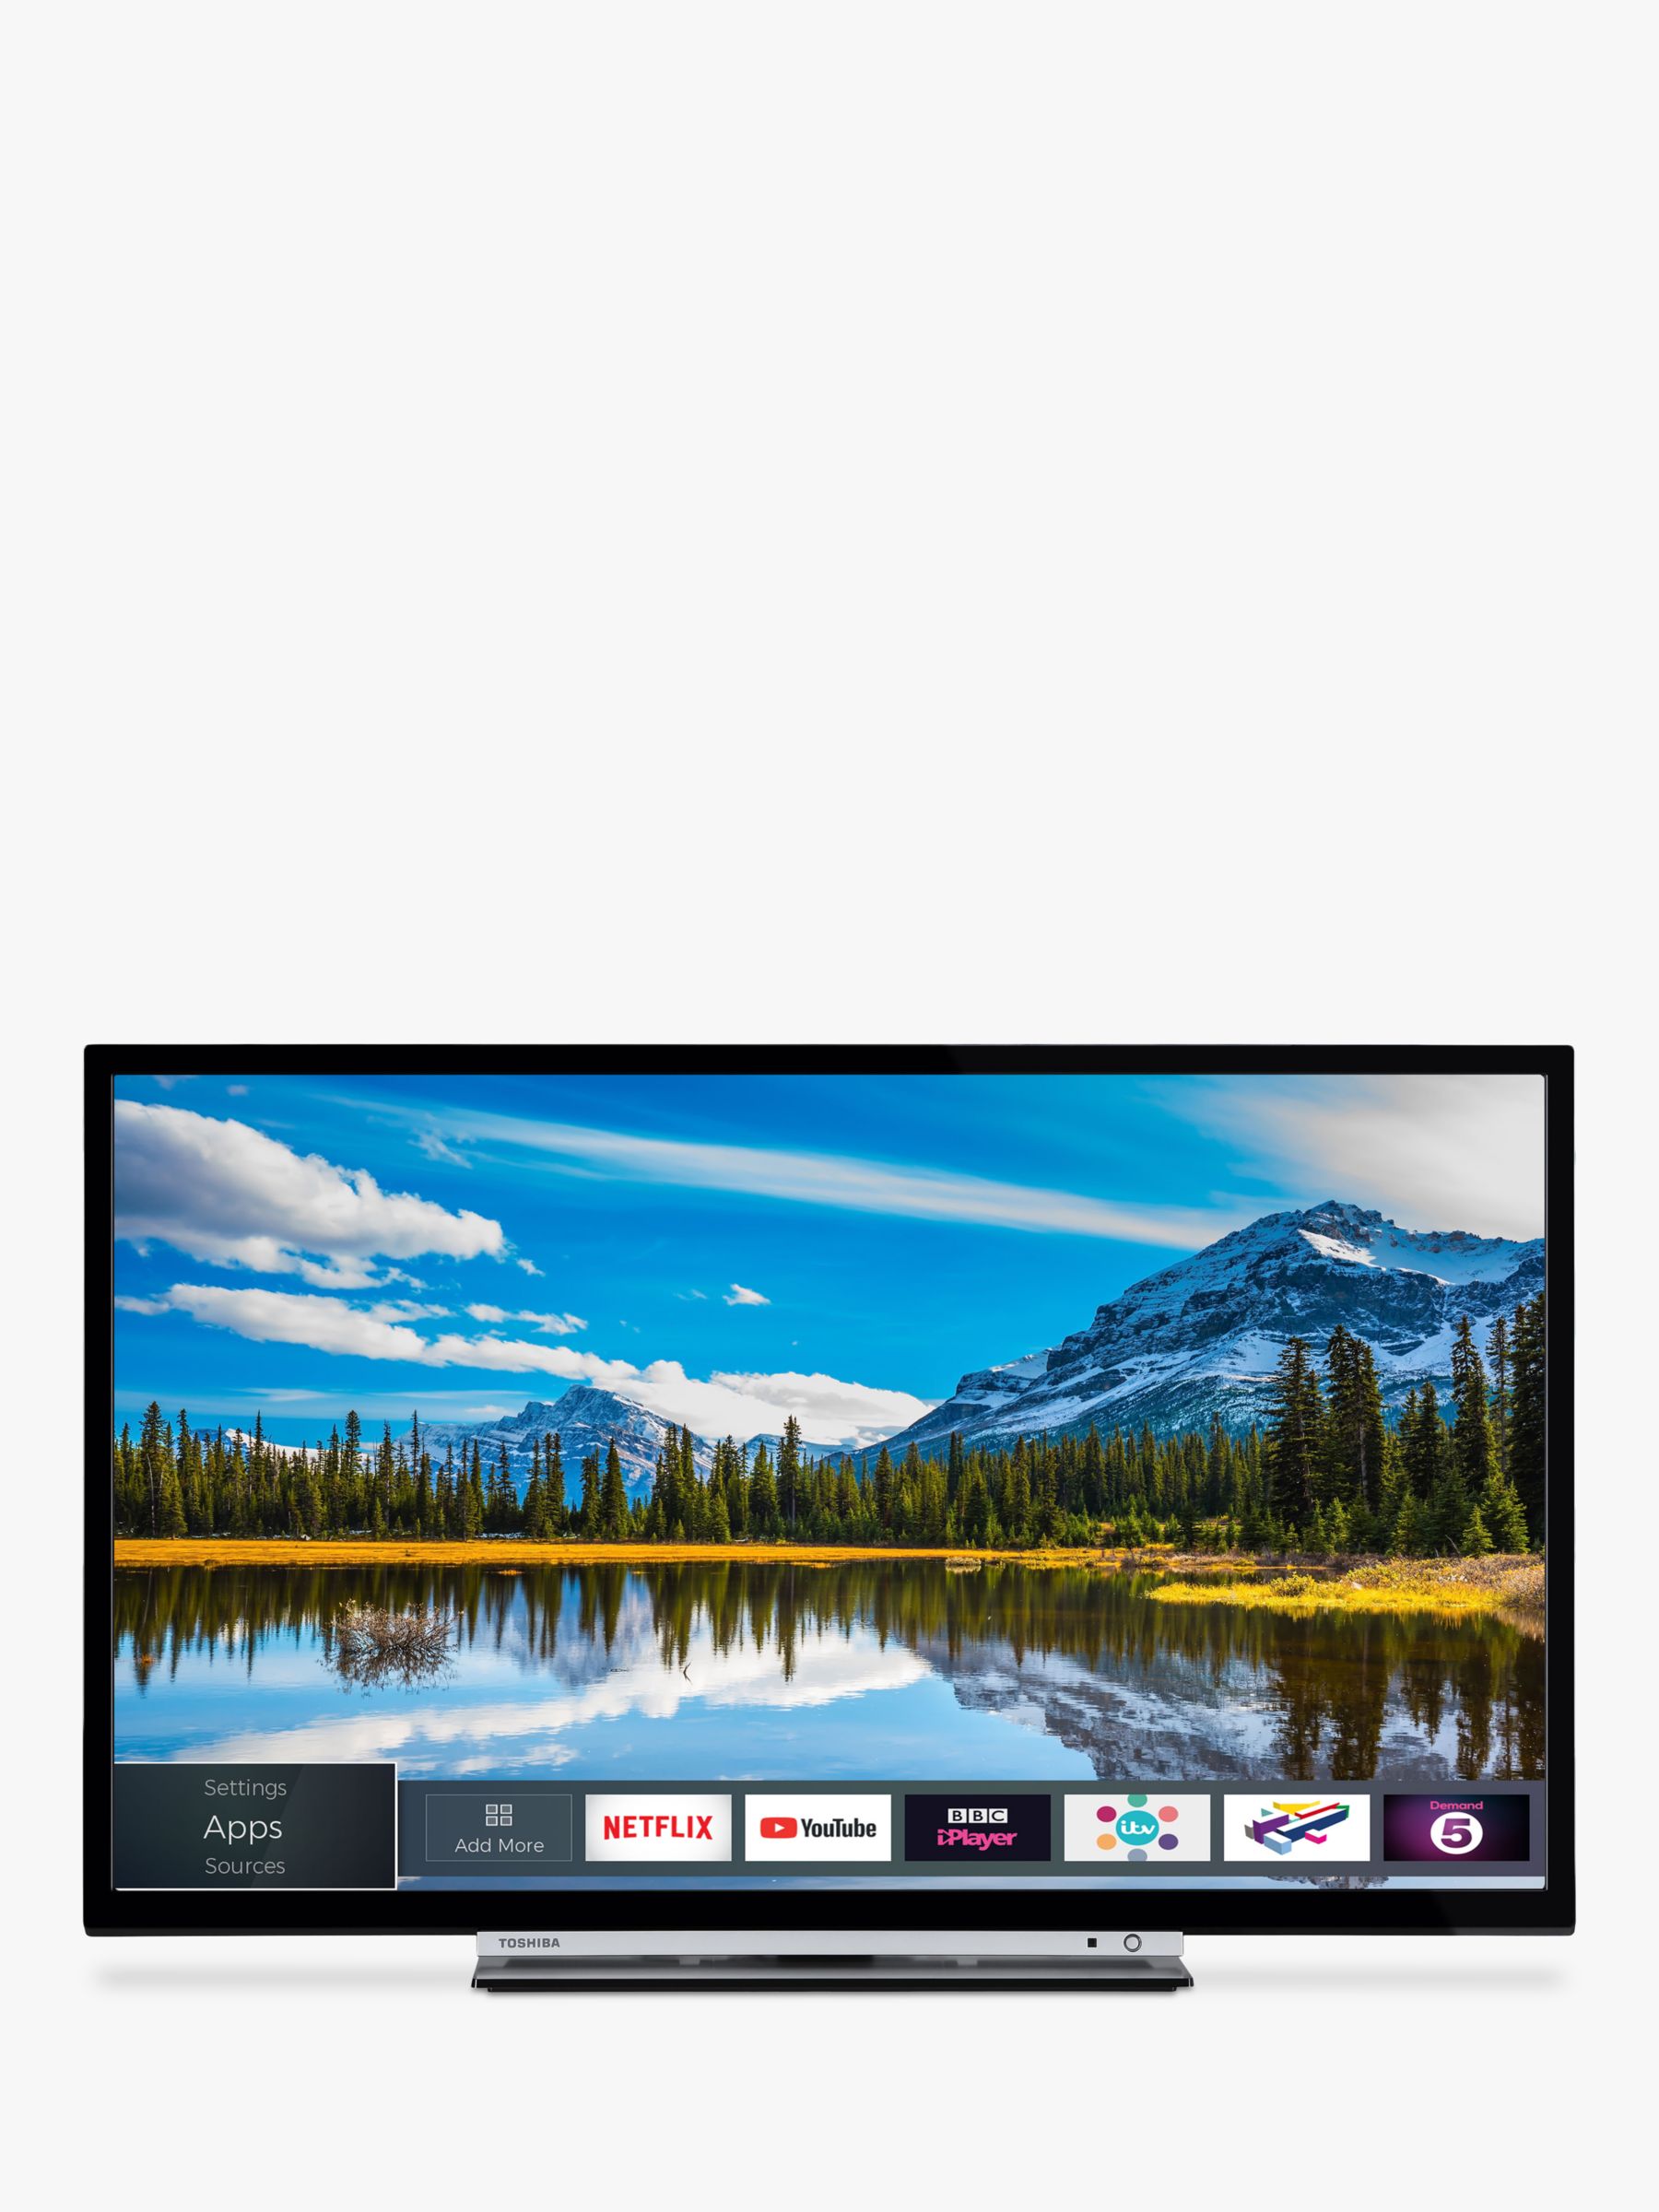 Toshiba 32L3863DB LED Full HD 1080p Smart TV, 32 with Freeview HD & Freeview Play, Black